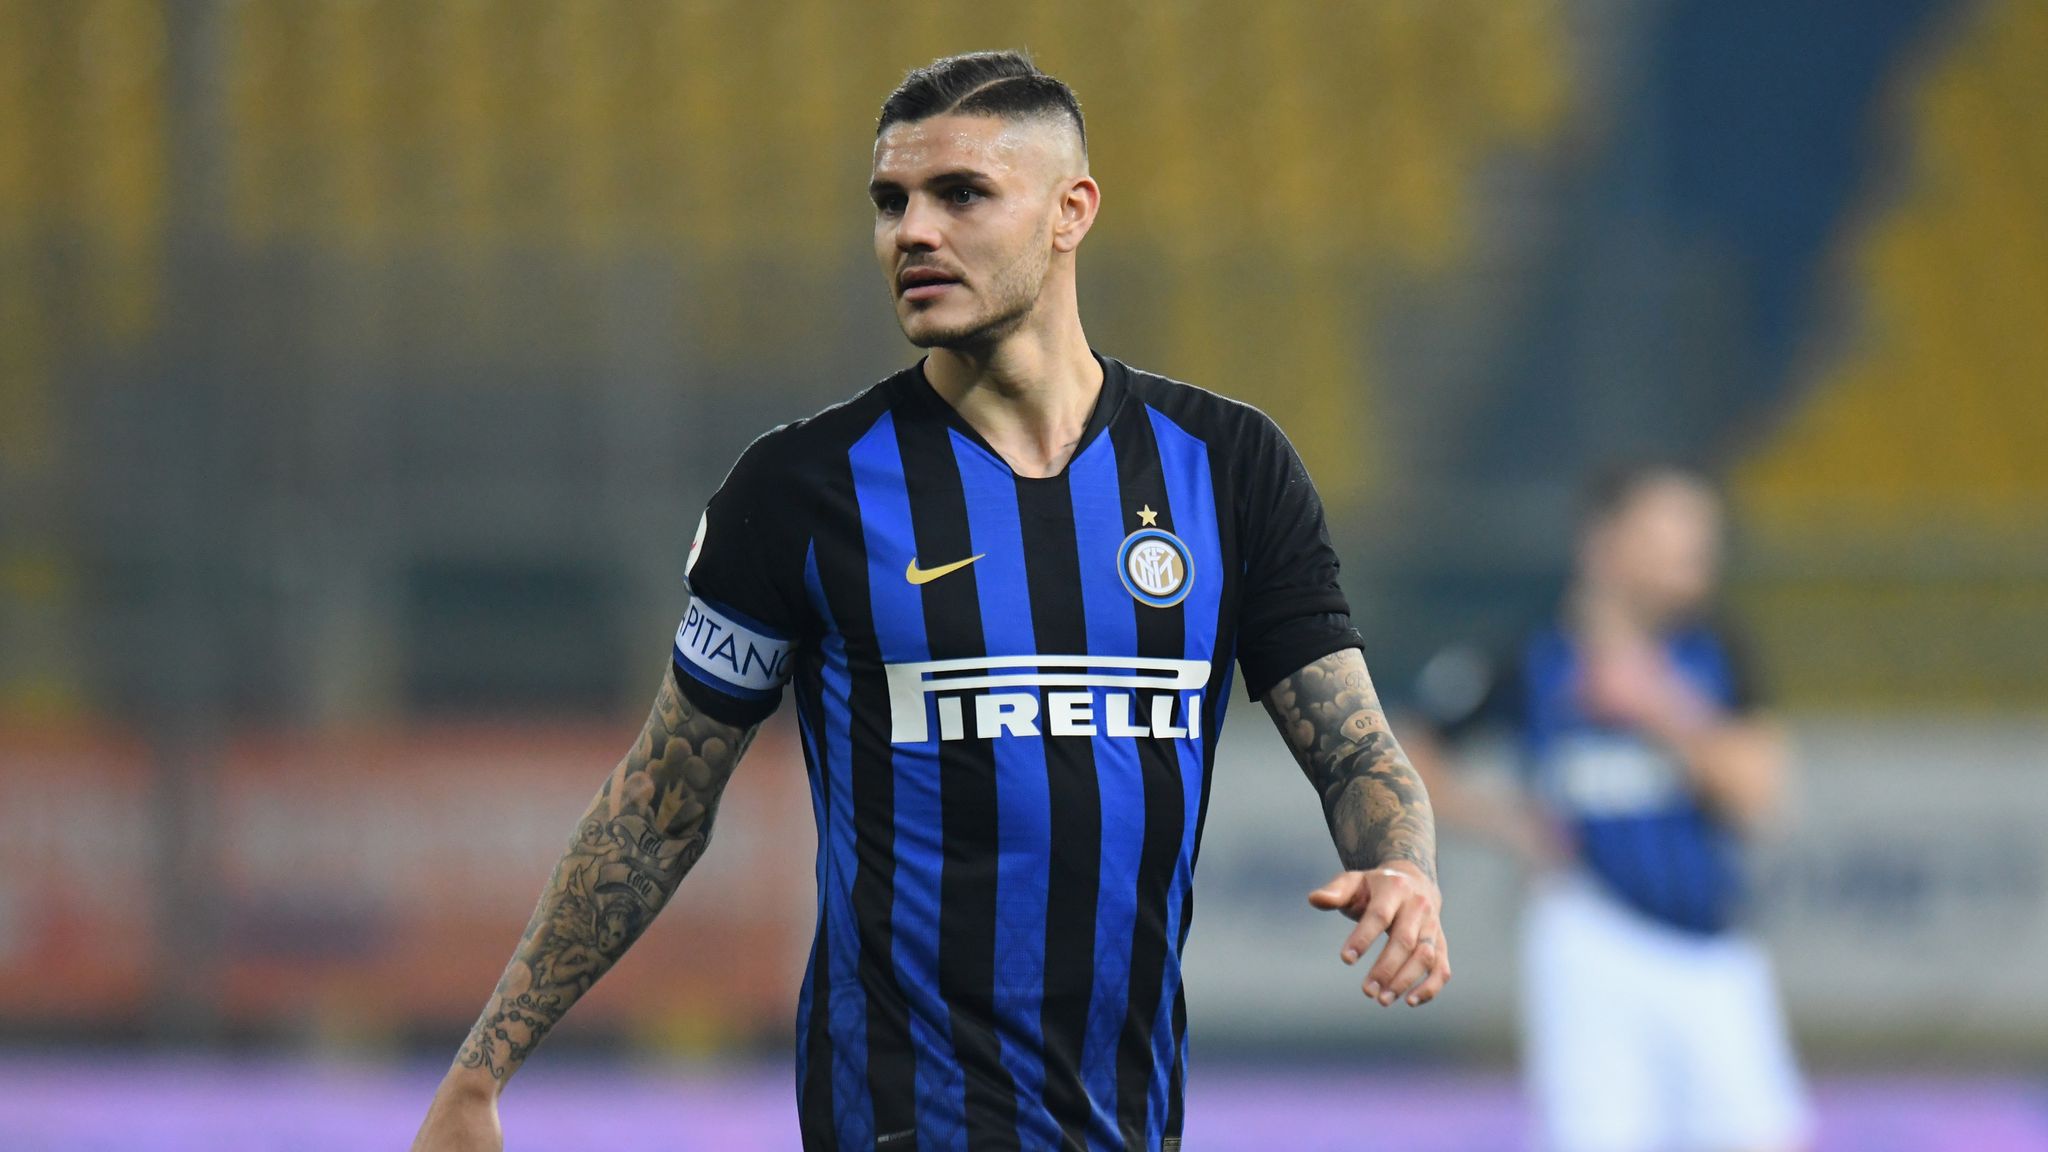 Mauro Icardi returns to training with Inter Milan after six-week absence, Football News